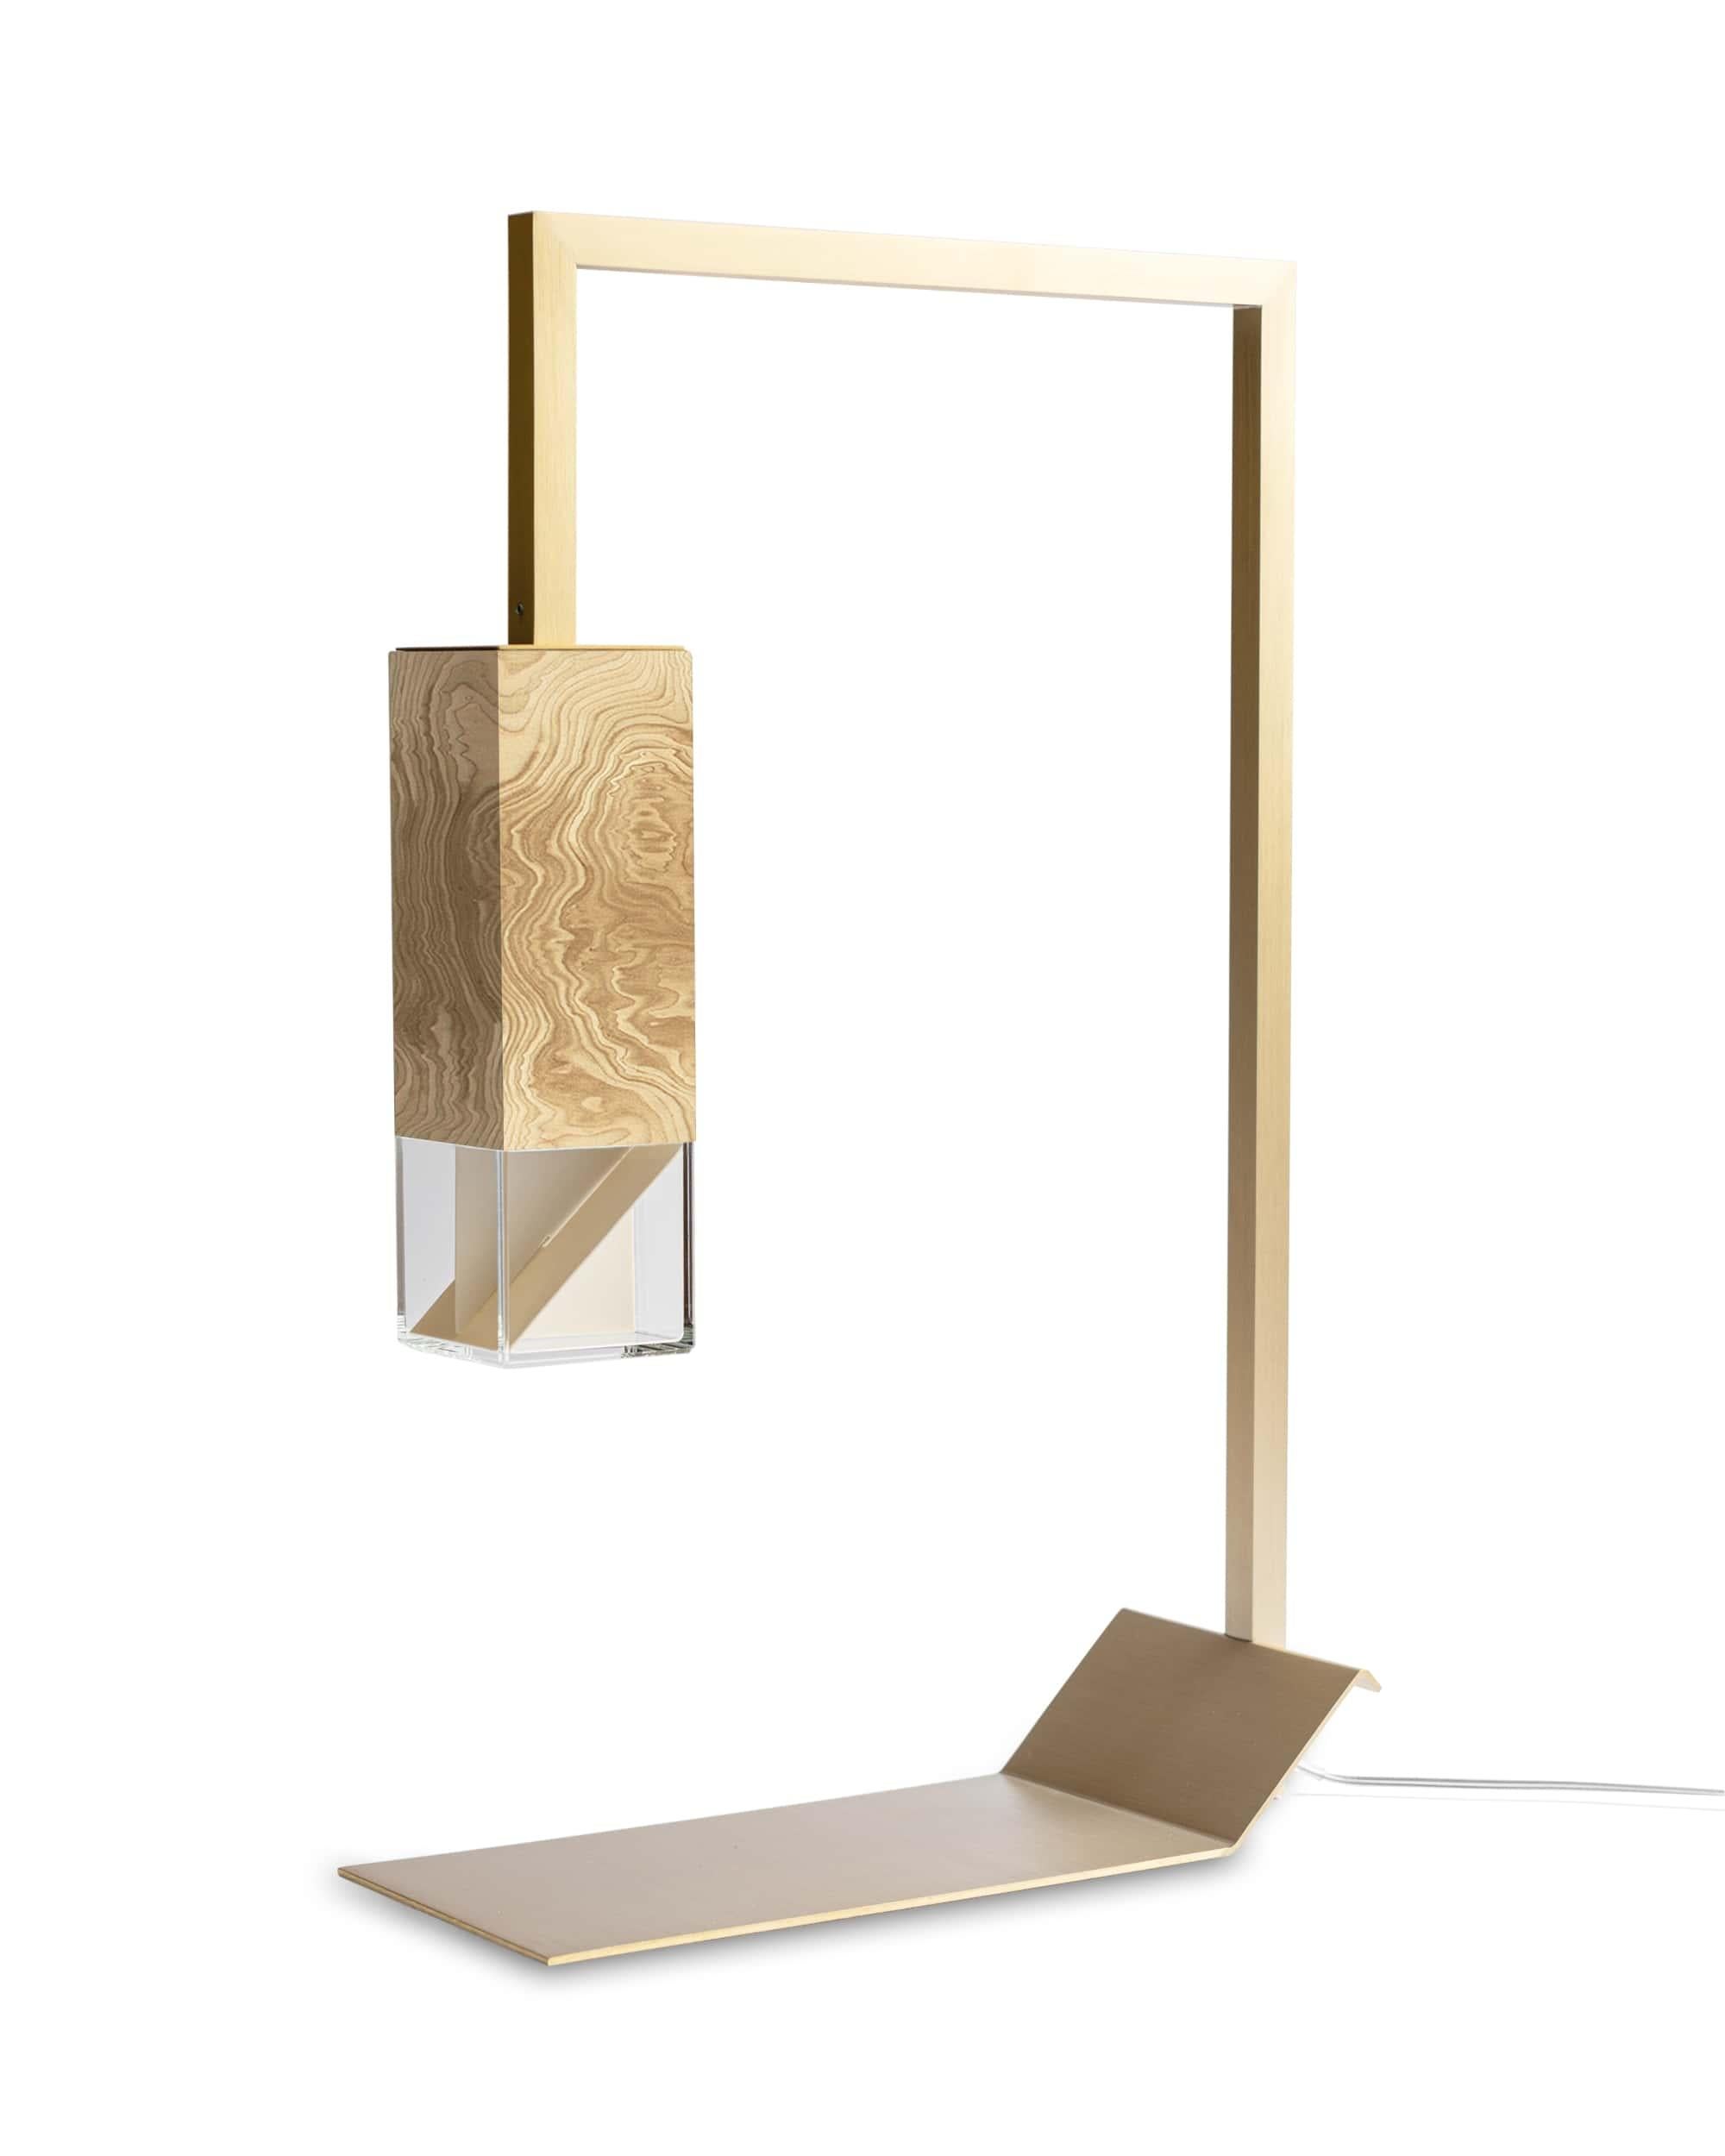 Wood Table Lamp Two 01 Revamp Edition by Formaminima.
Limited Edition of 250 pieces. Numbered and signed with certificate of authenticity.
Dimensions: W 10 x D 25 x H 40 cm.
Materials: olive briarwood, brass, crystal.

All our lamps can be